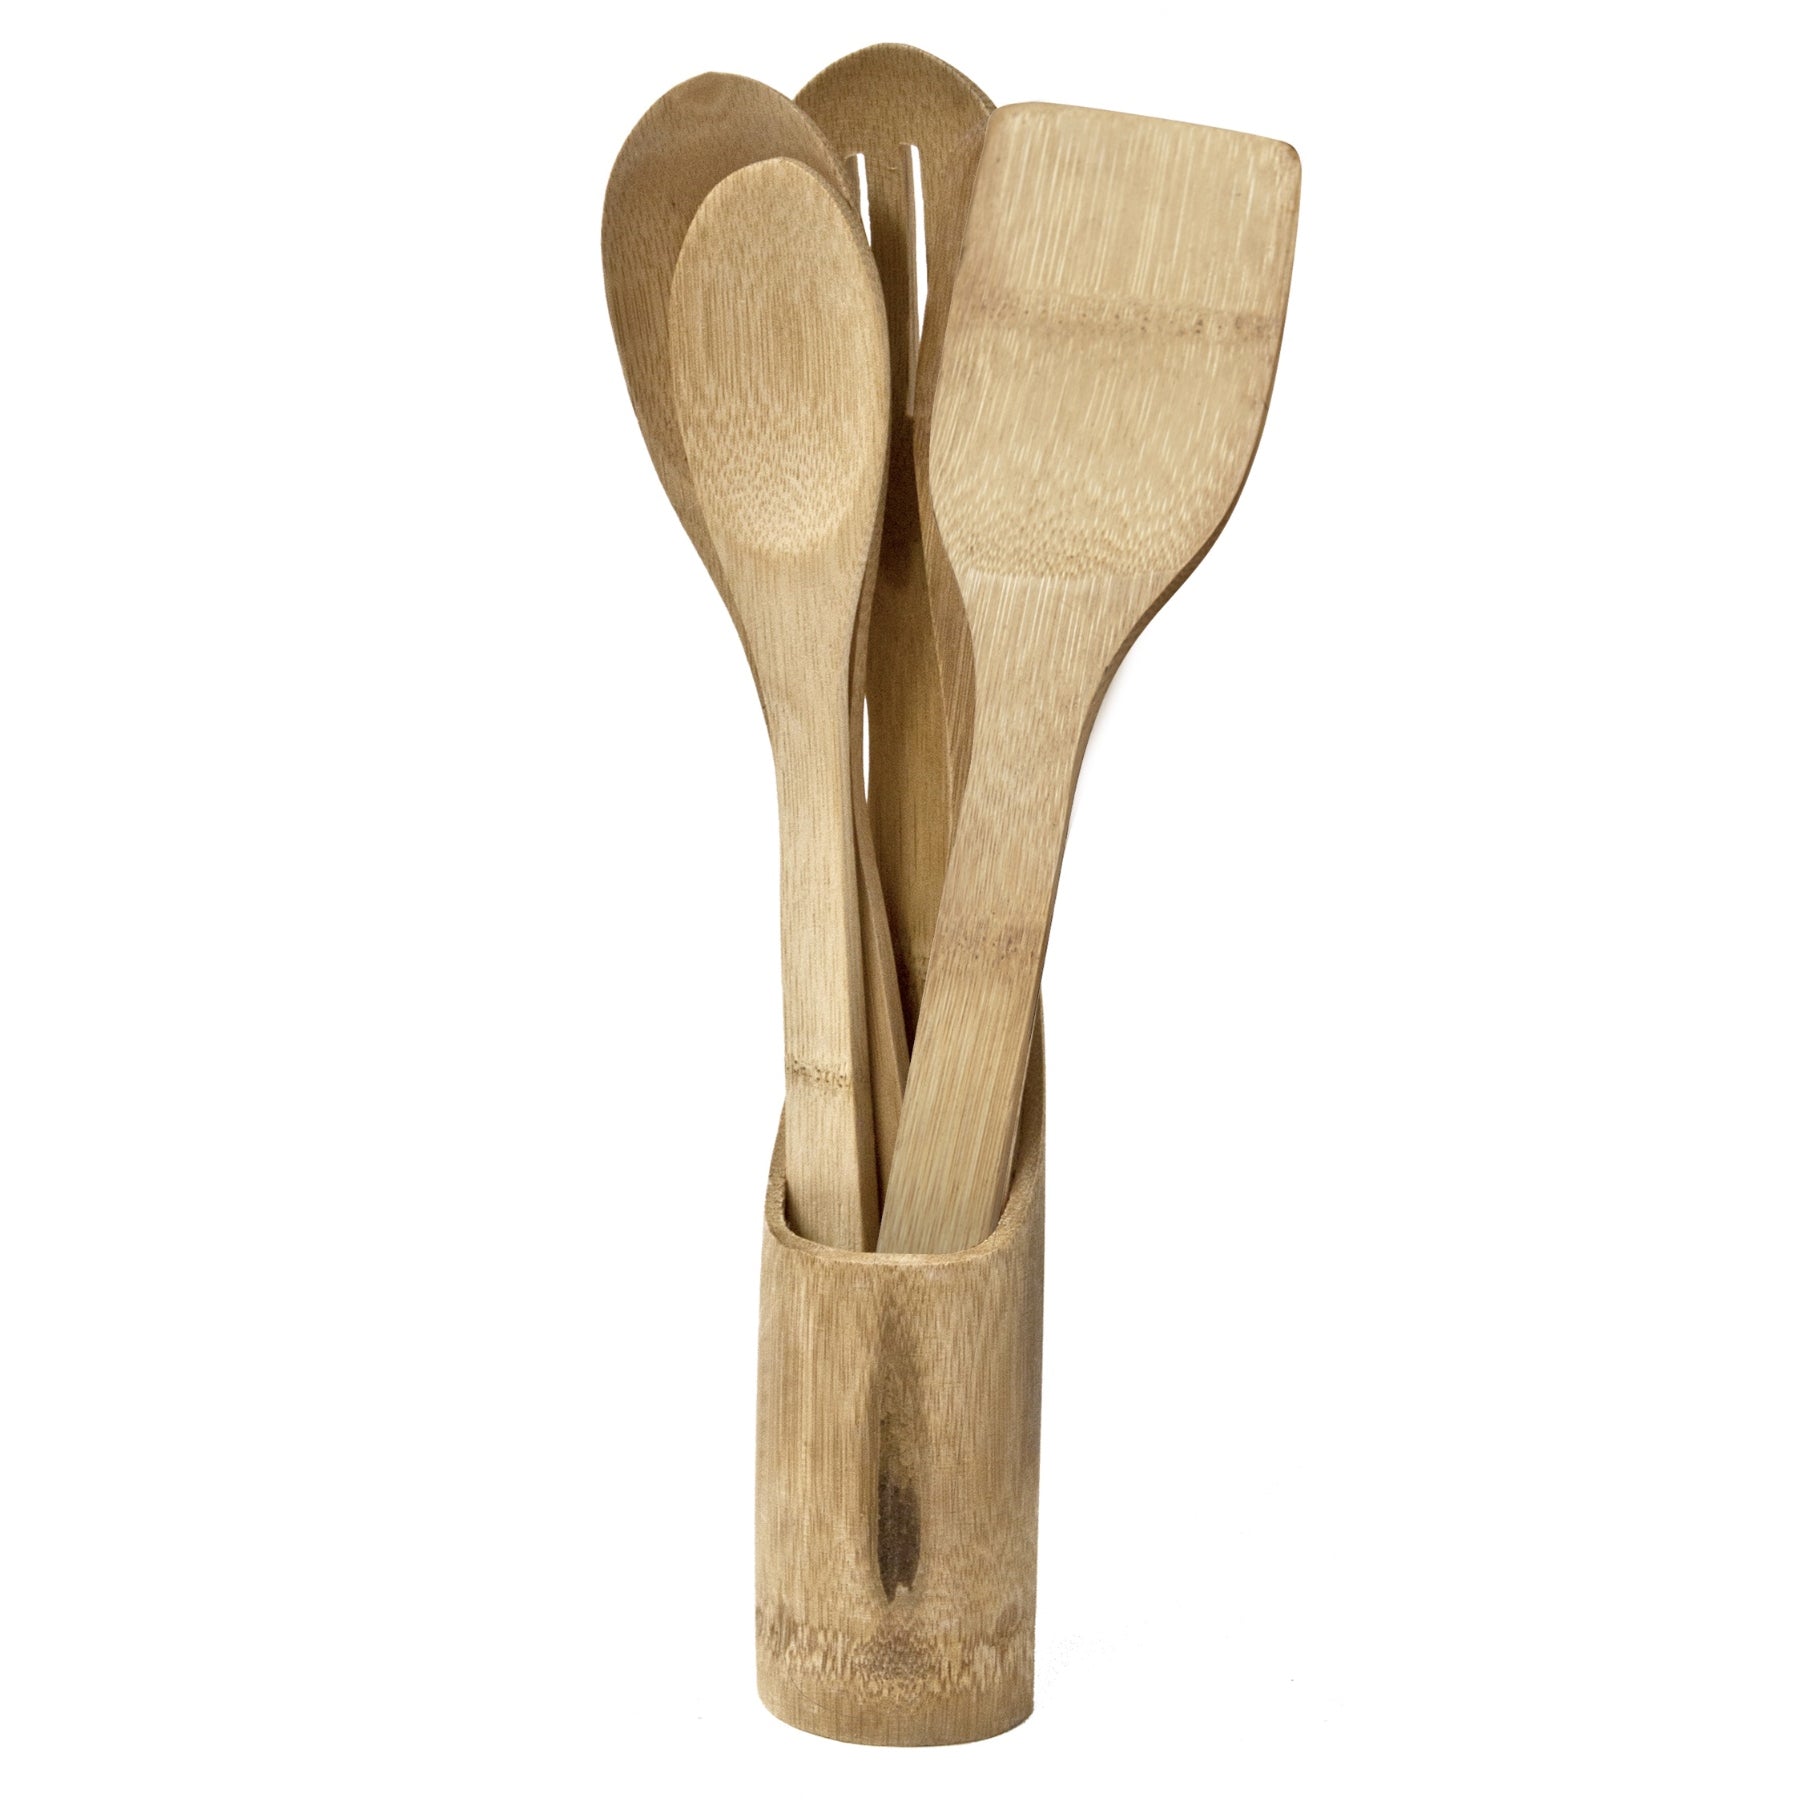 Bamboo Spoon With Holder Set - 5 Pc